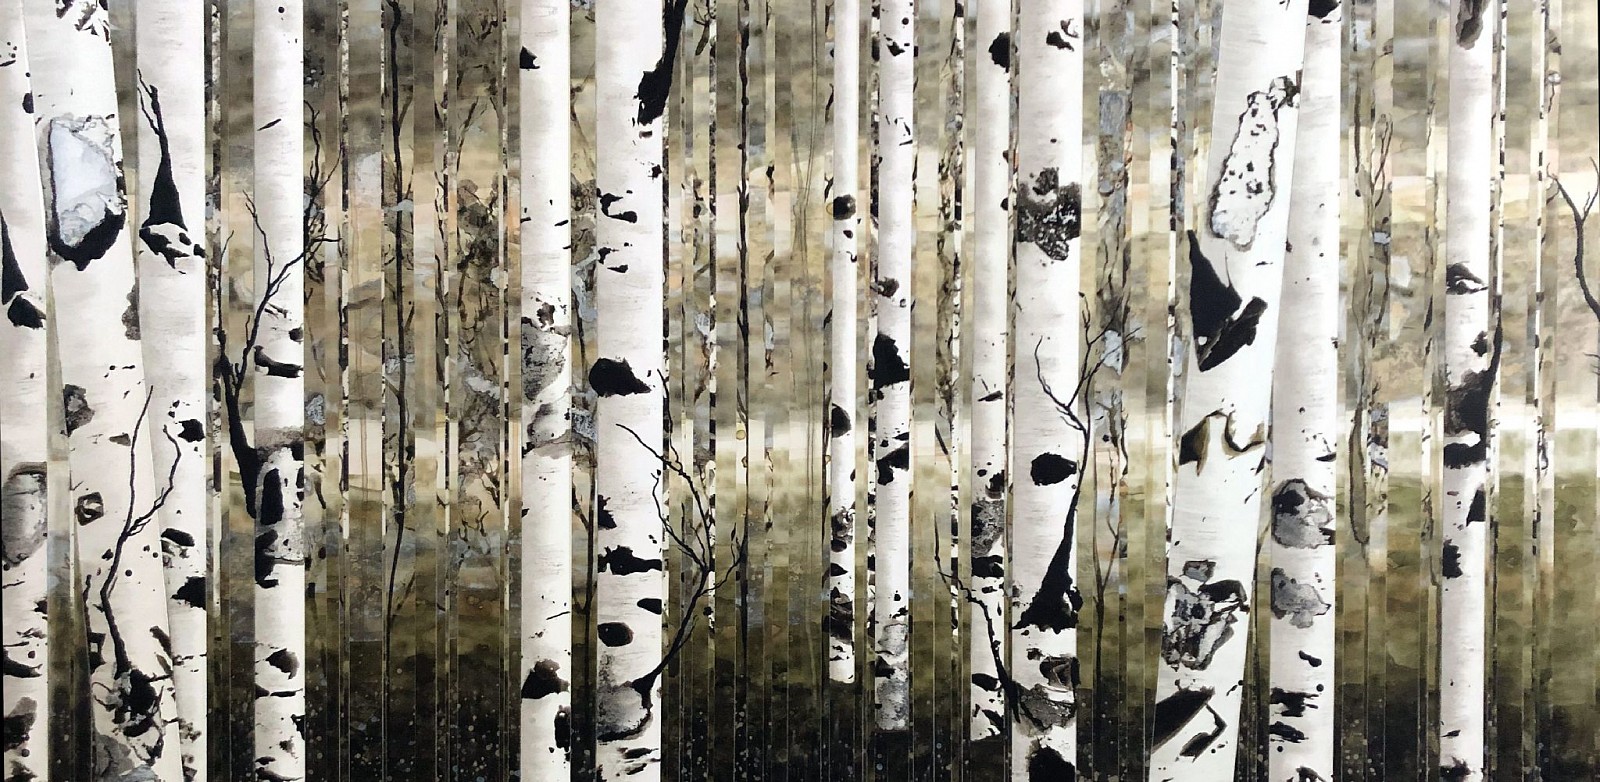 Anastasia Kimmett, Stormy Skies with Aspens, 2022
Mixed Media on Panel, 24 x 48 in. (61 x 121.9 cm)
SOLD
08044
&bull;